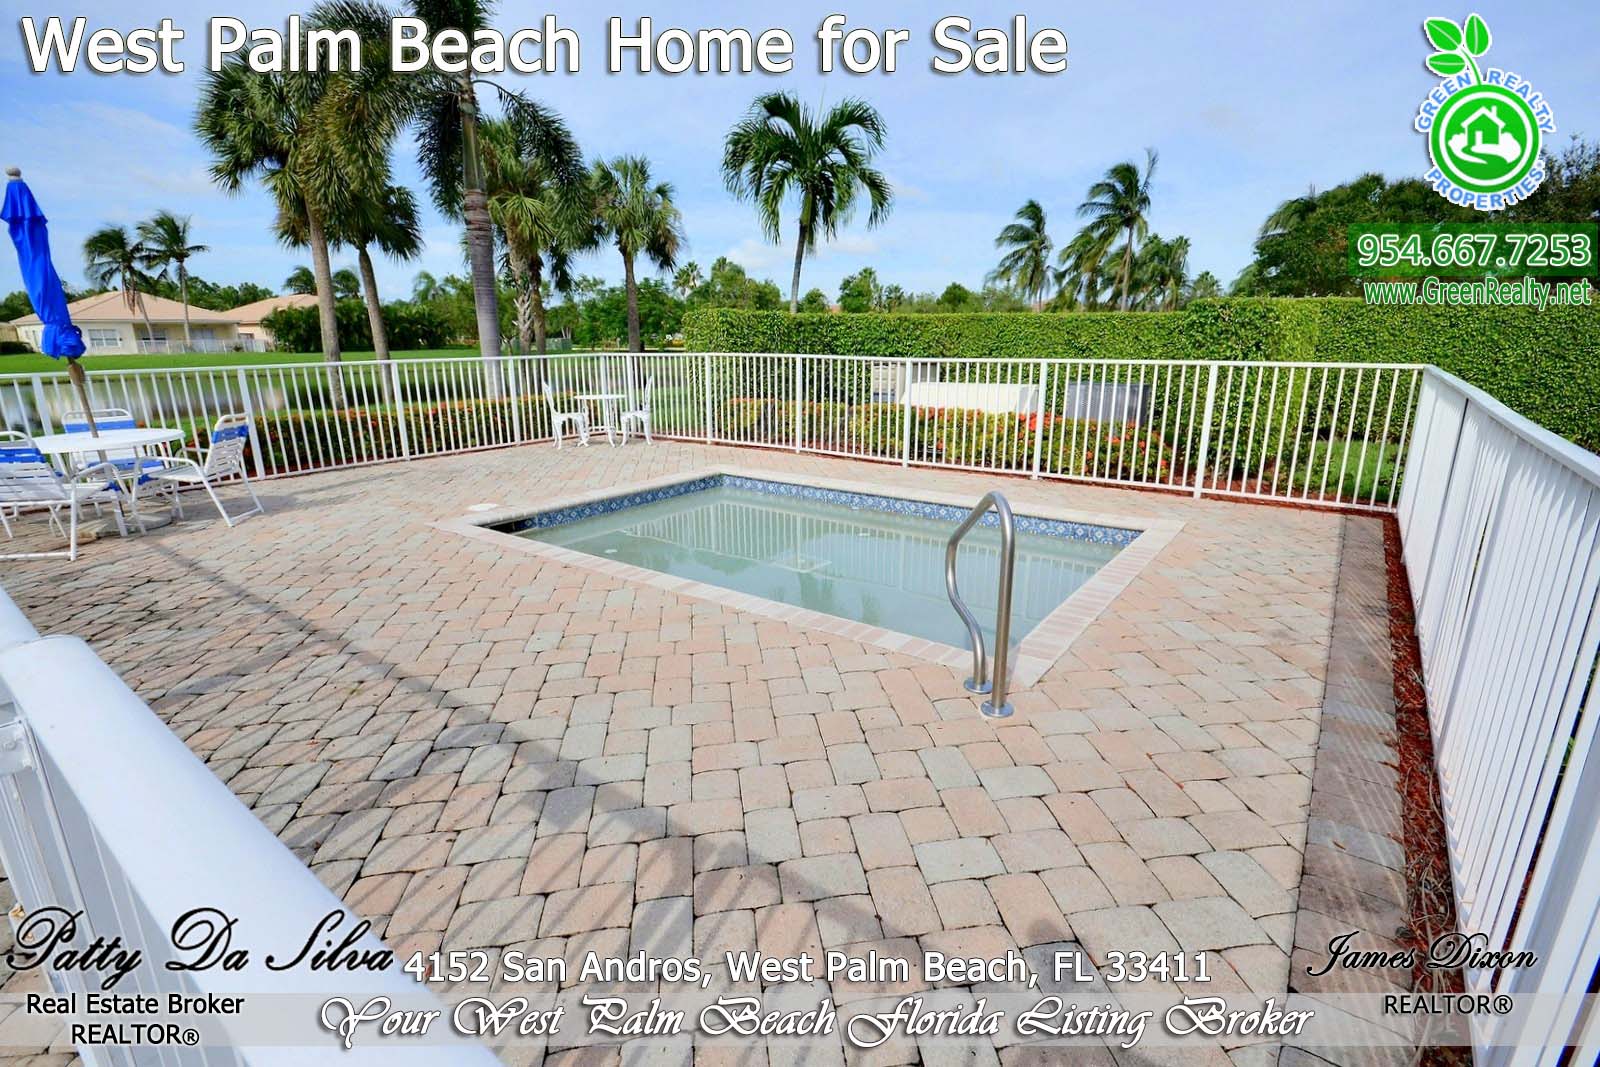 West Palm Beach Real Estate - 4152 San Andros (25)_1